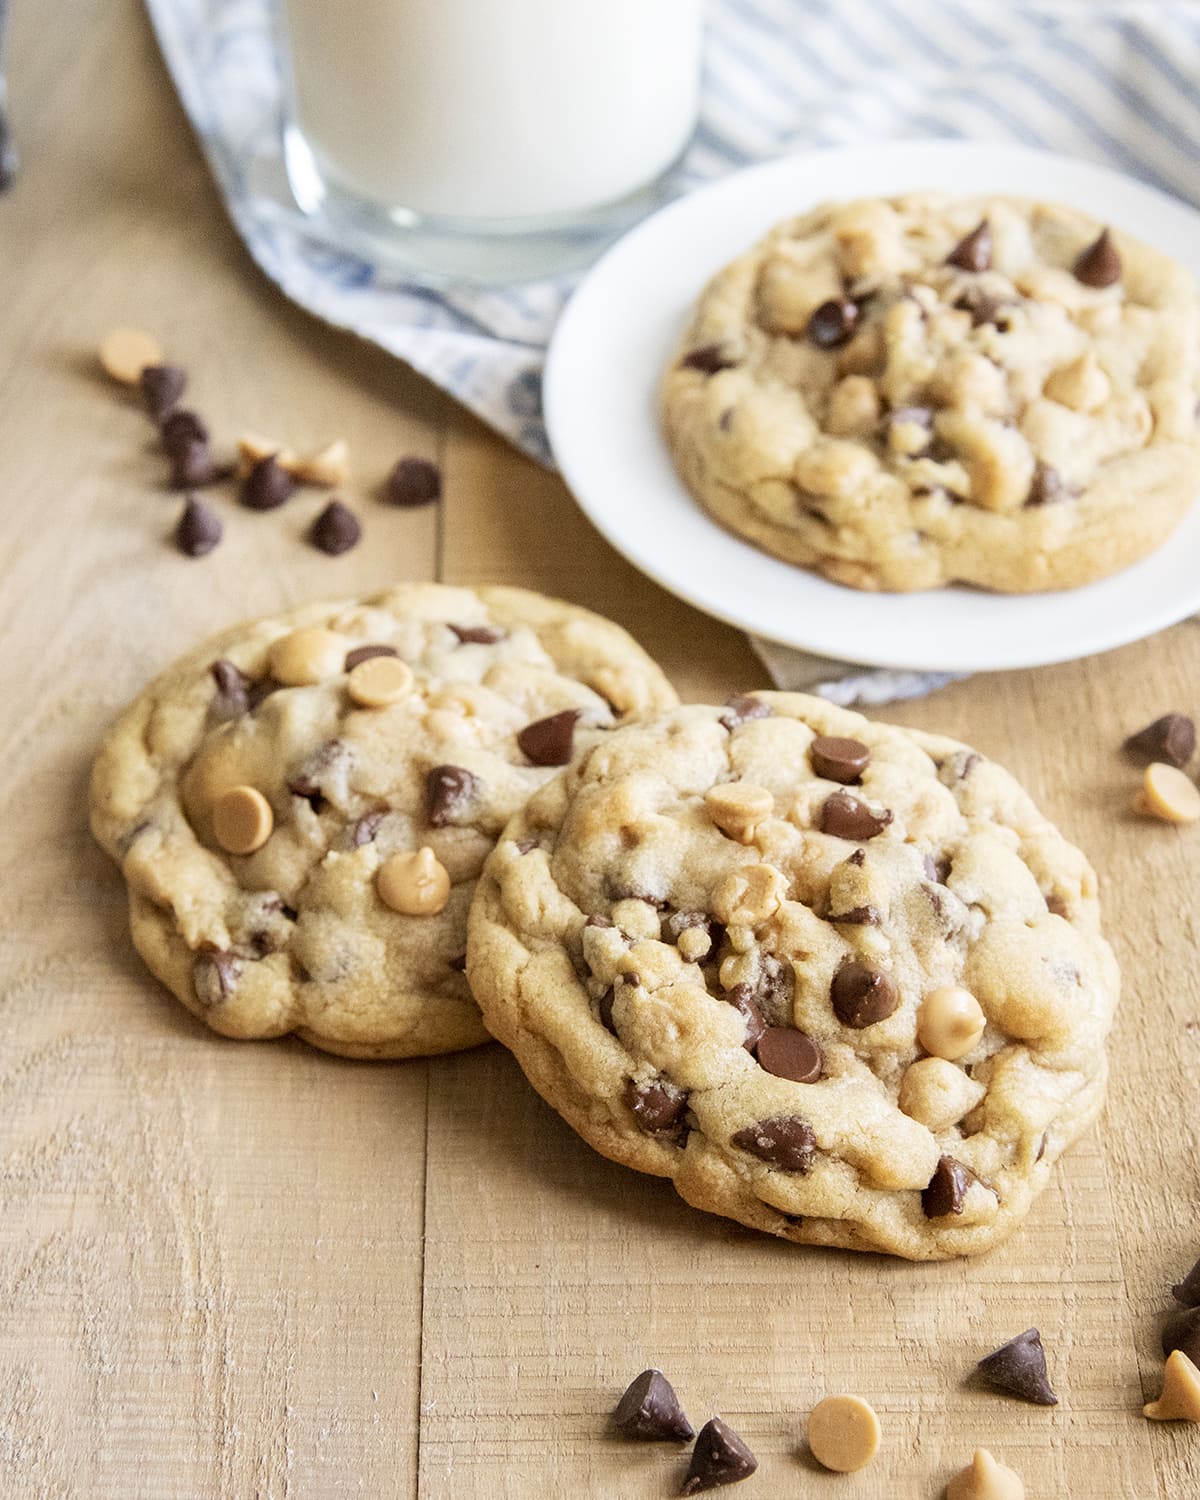 Two giant cookies full of chocolate chips and peanut butter chips on a wooden surface, with another cookie on a plate behind them.